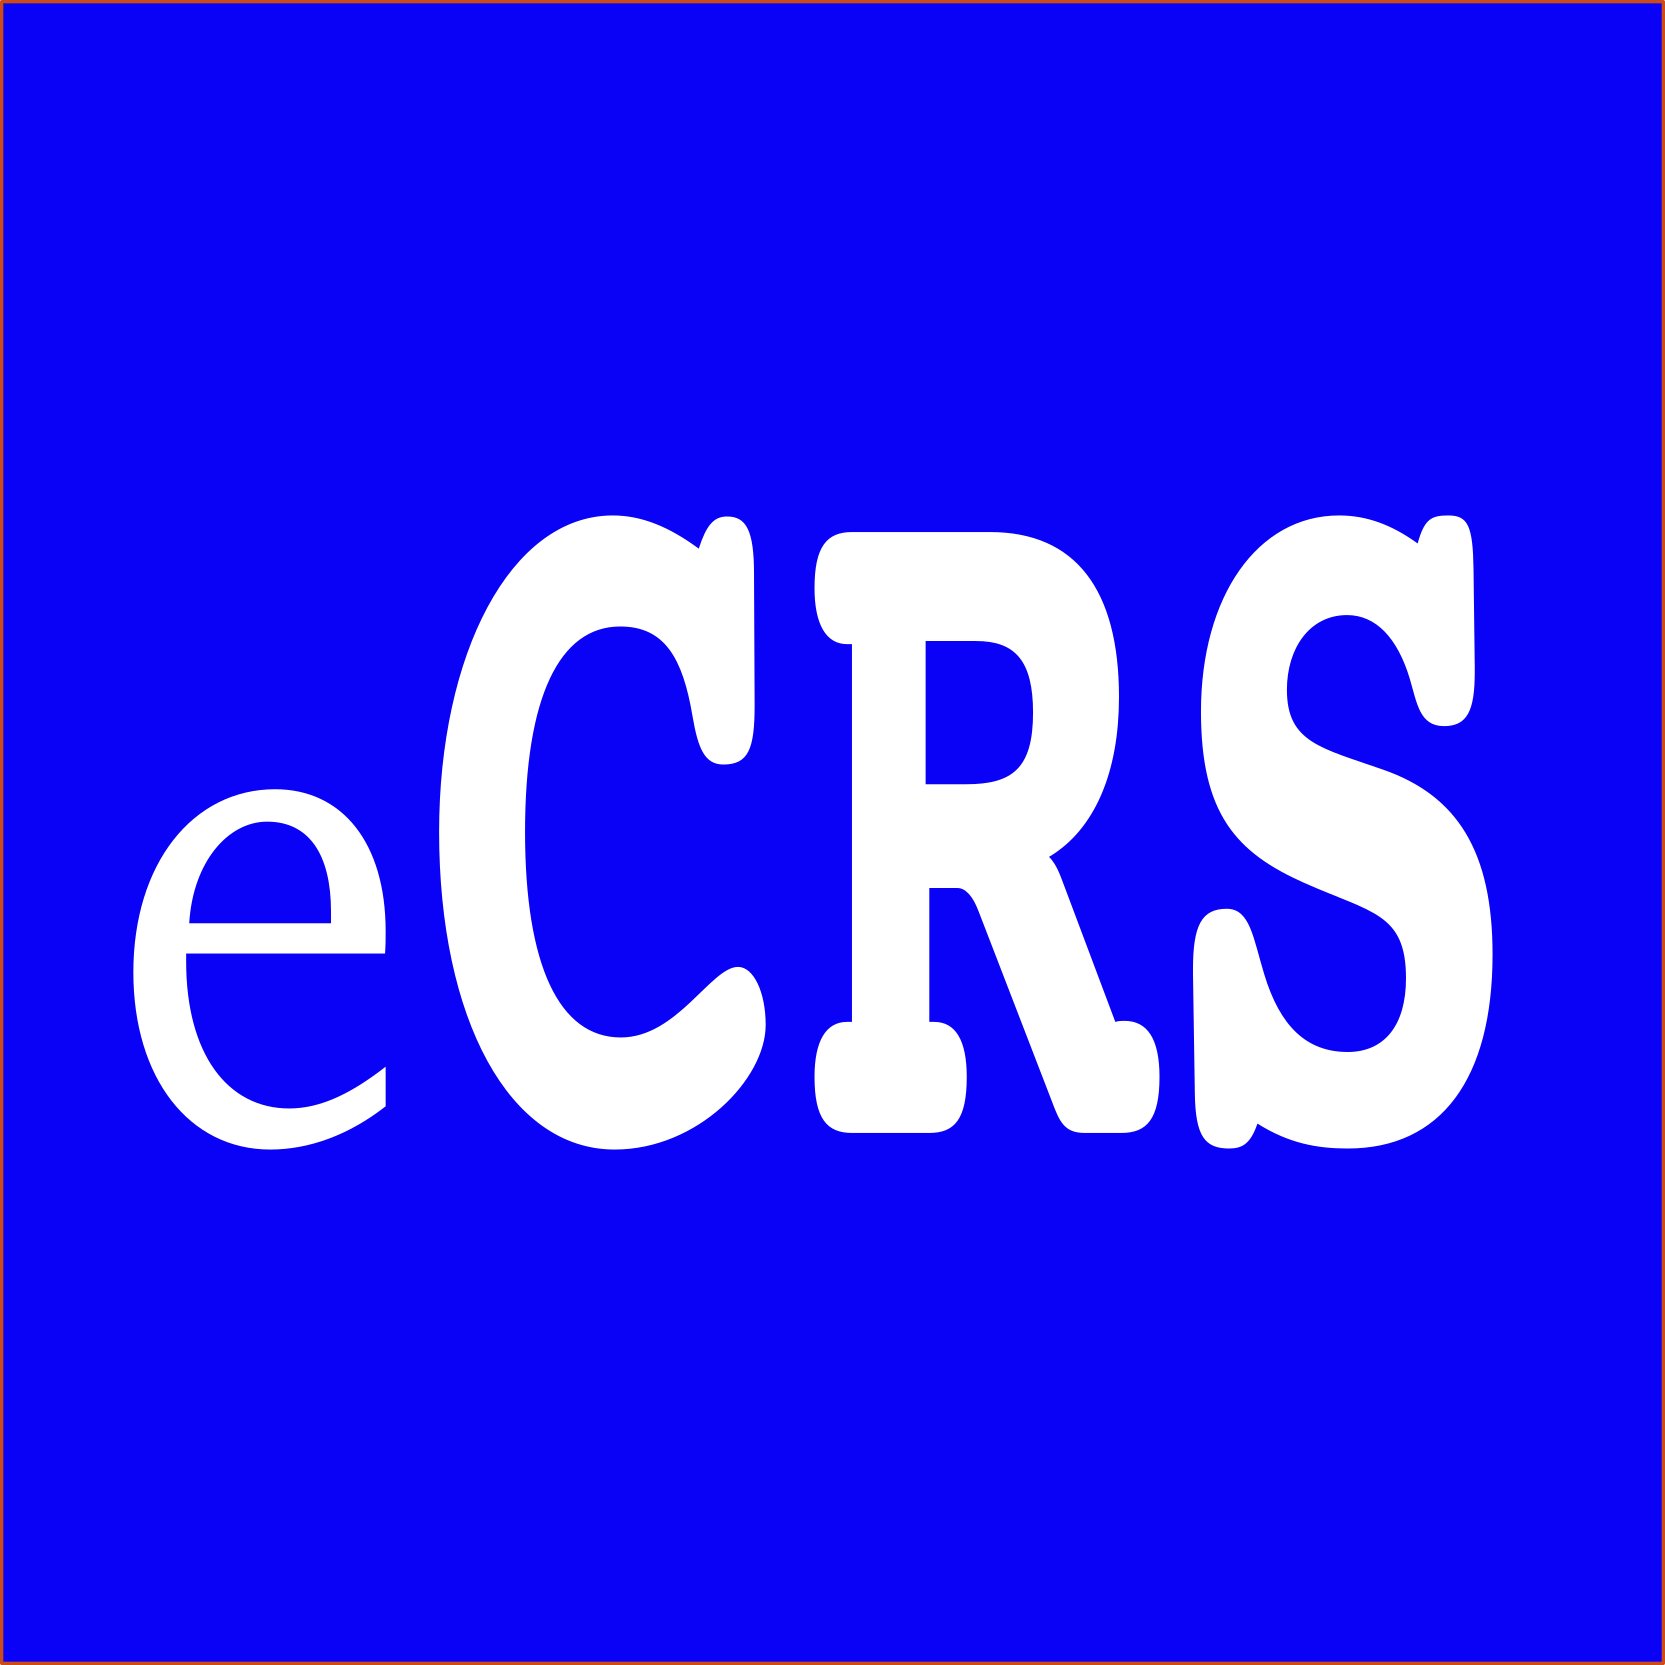 Making CRS reports publicly available to all. This is a public interest bot. Qs? @danielschuman. Donate? https://t.co/QRd6uiviXm